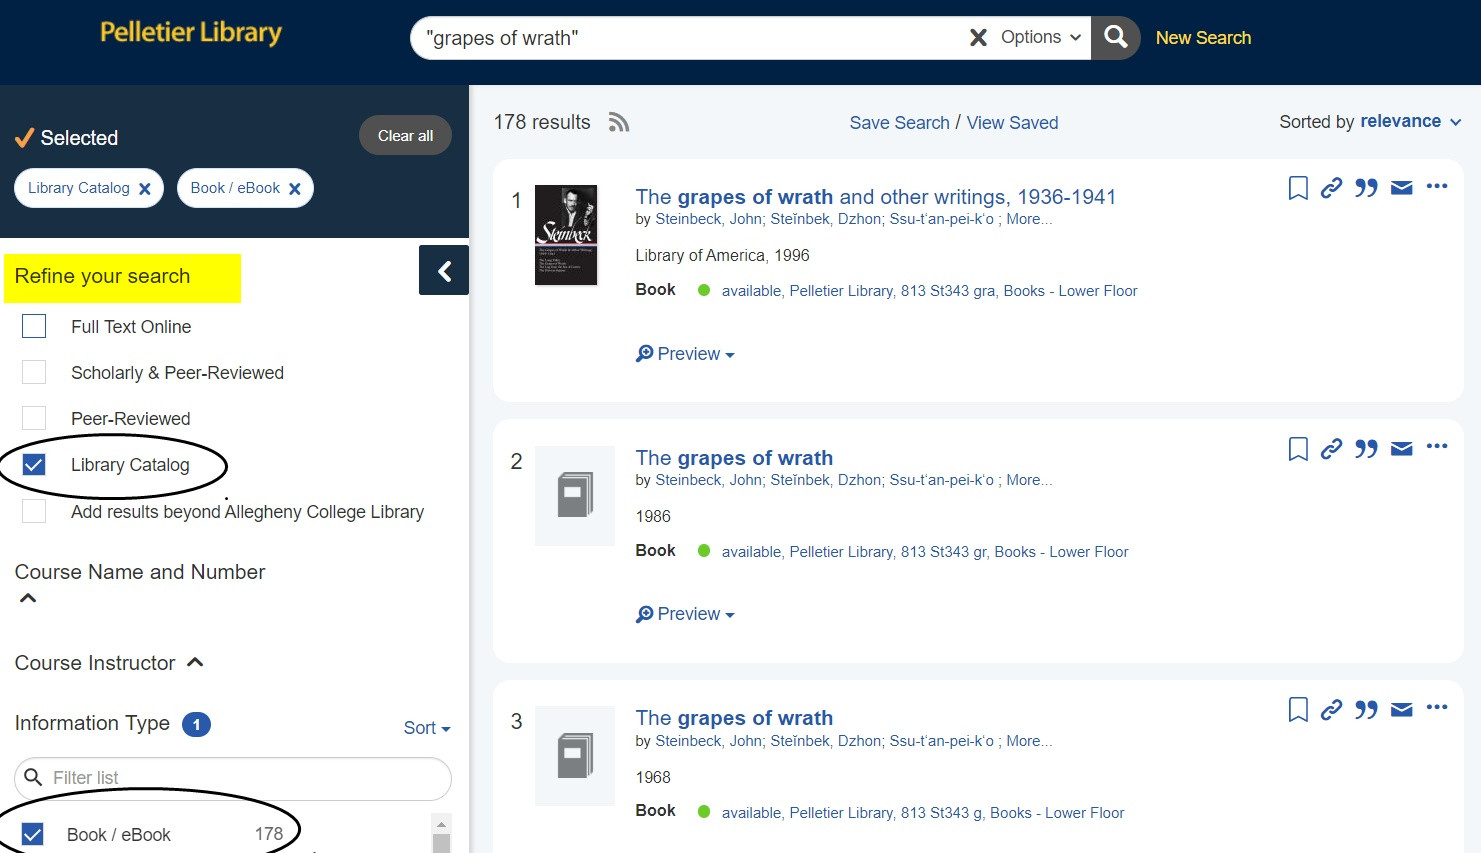 Screenshot of search results with "Library Catalog" and "Book/eBook" filters applied